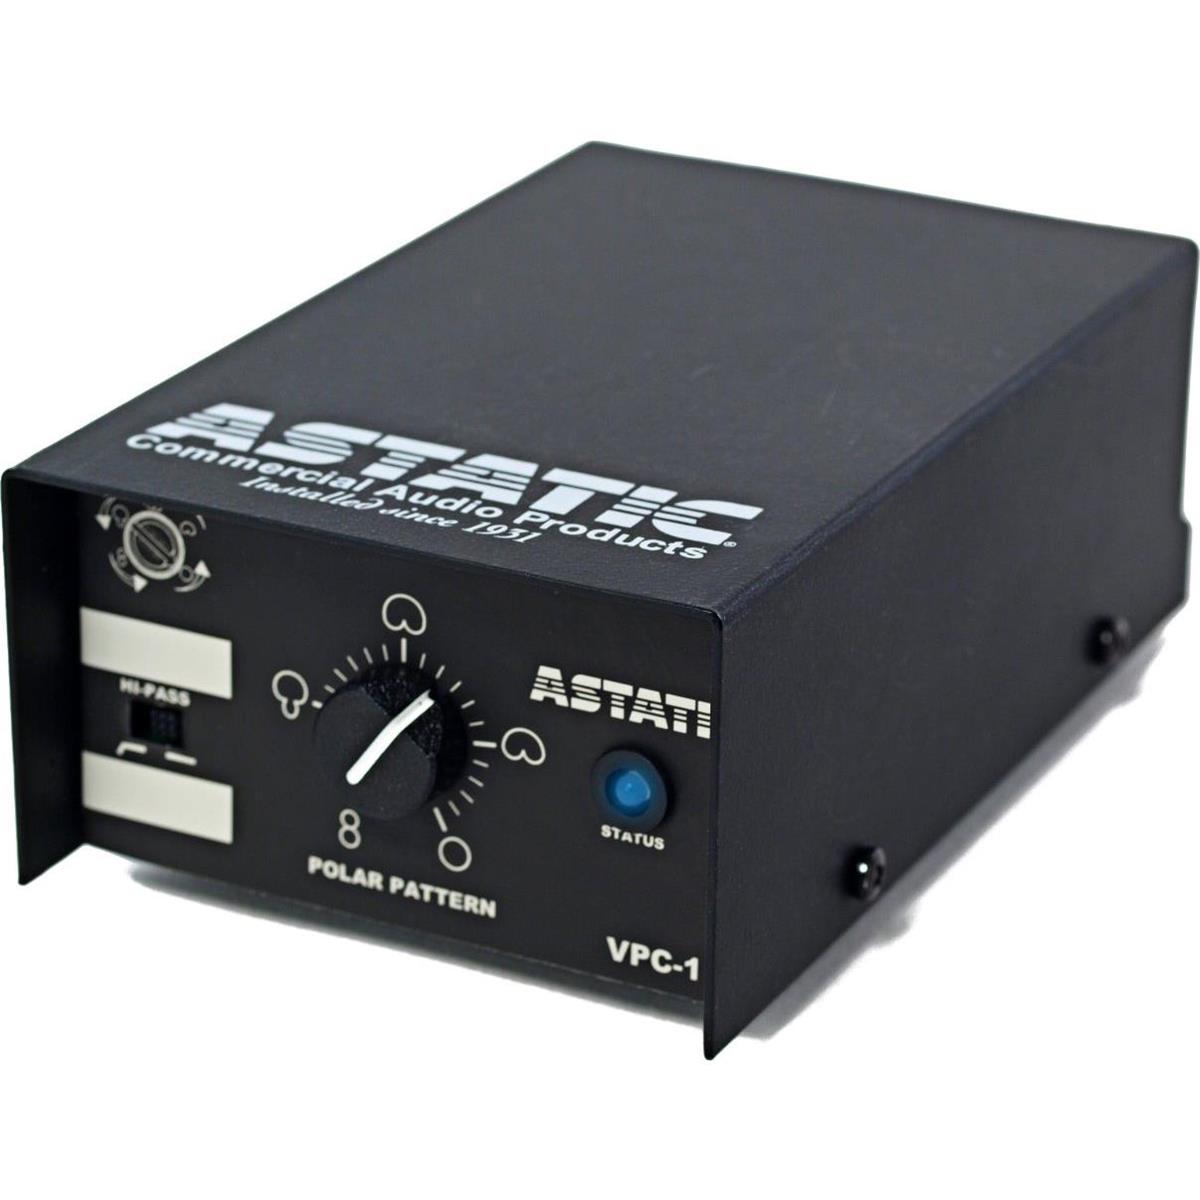 Image of CAD Audio Astatic VPC-1 Remote Variable Pattern Control box